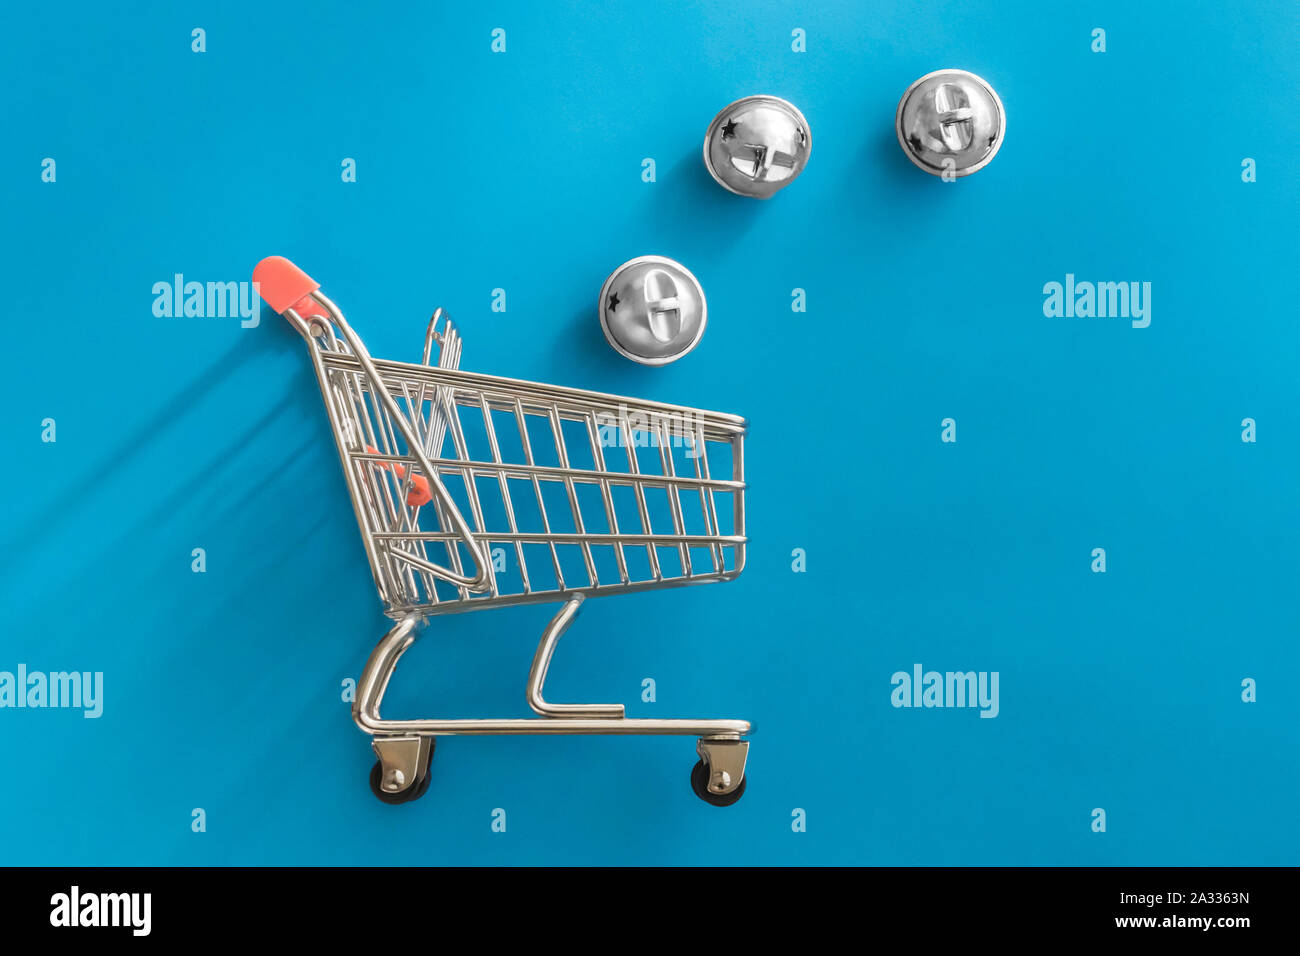 New Year or Christmass toys in trolley shopping cart on colorful blue background. Delivery service. Holiday, sale and discount concept. Stock Photo